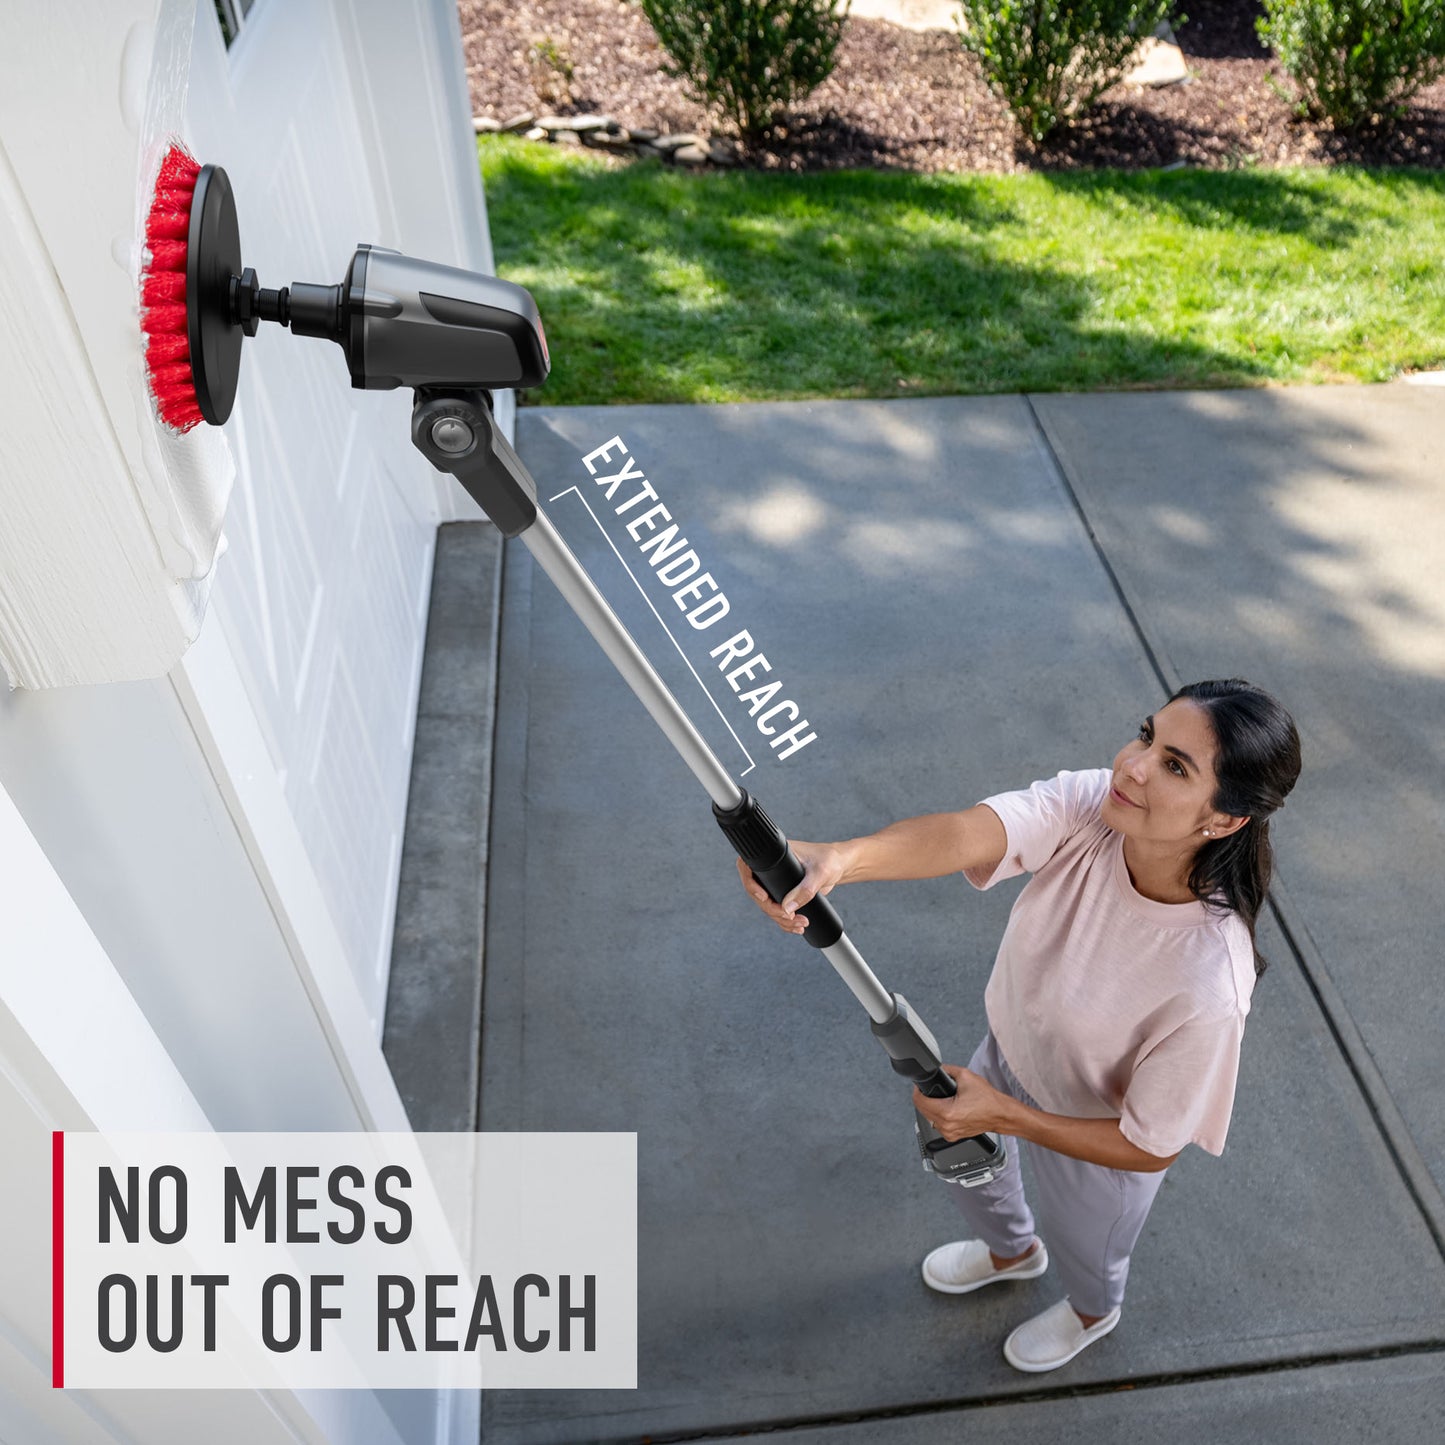 ONEPWR Telescoping Cordless Scrubber